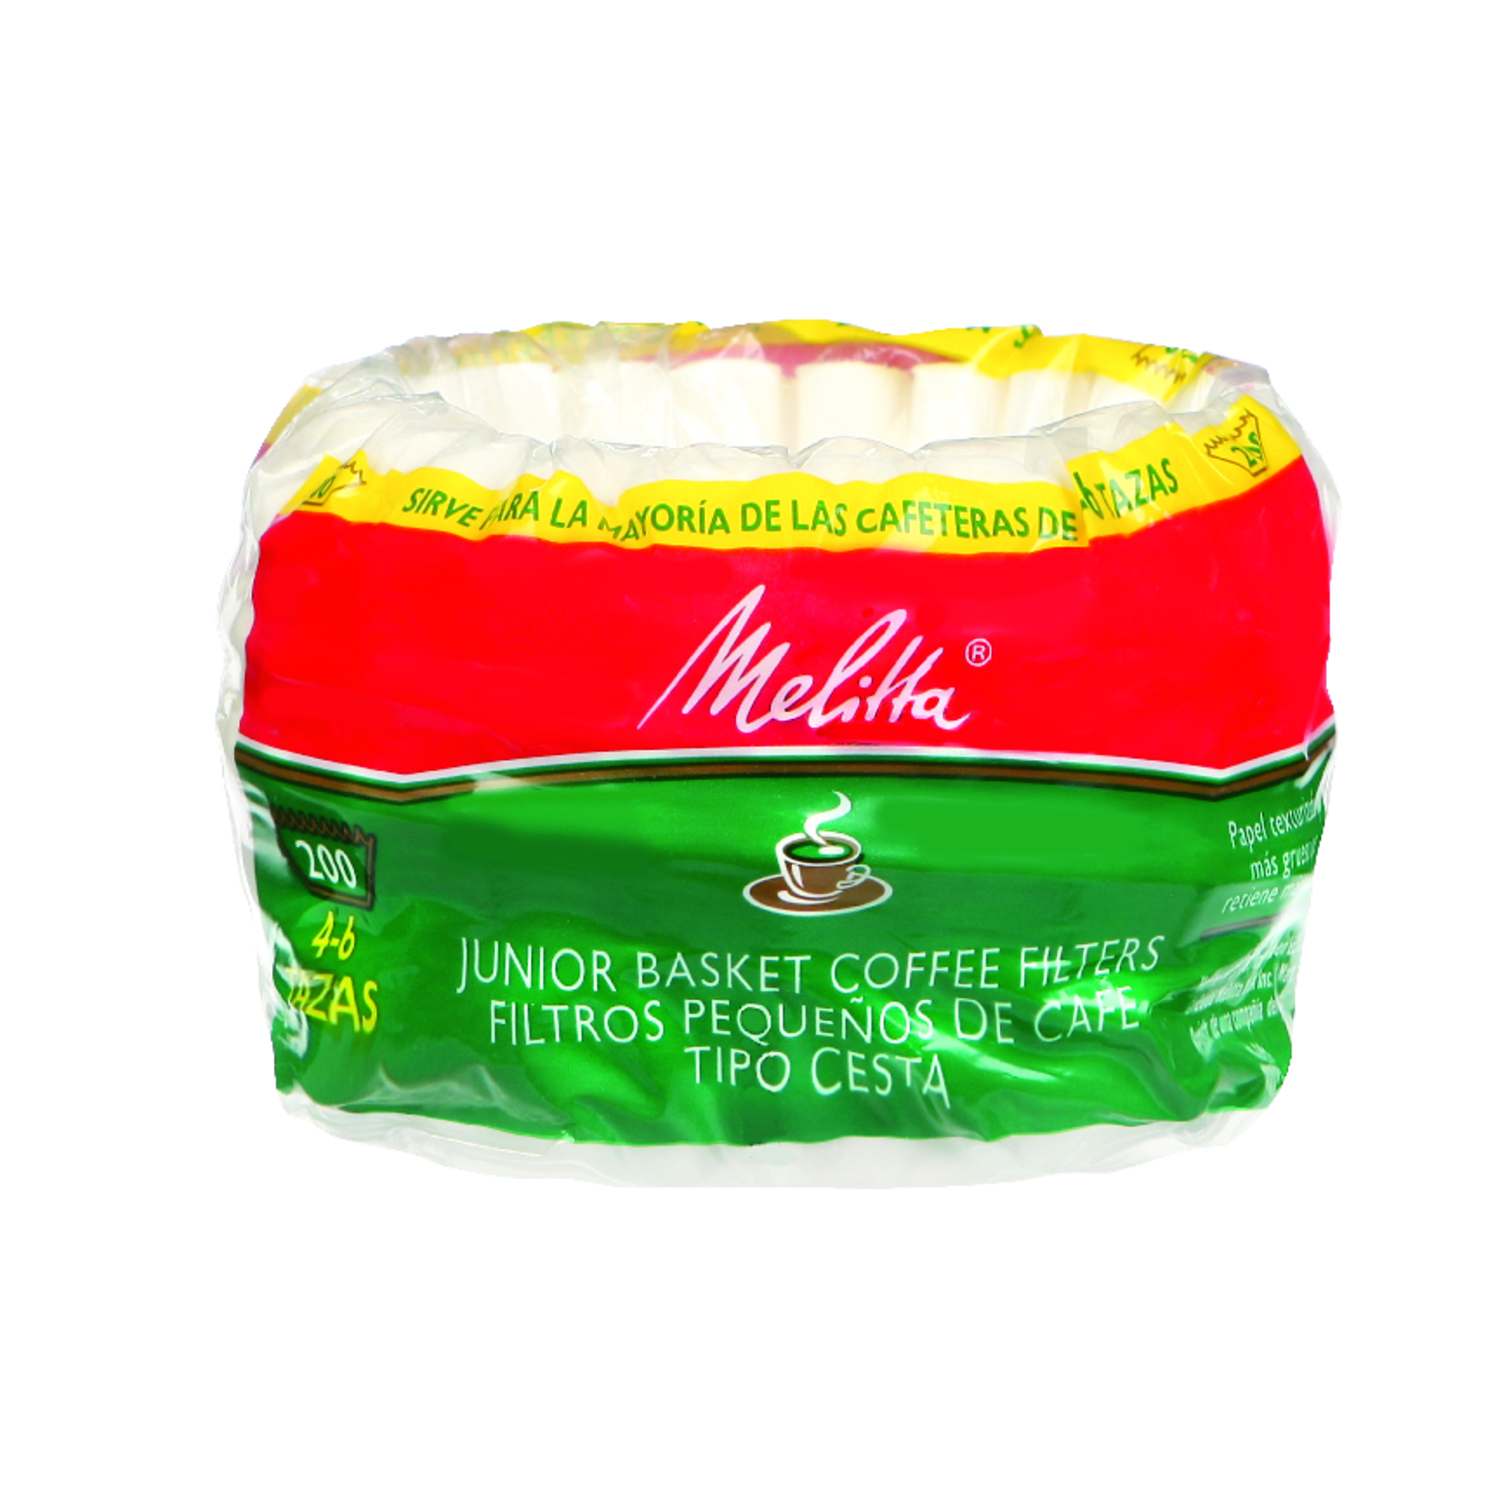 Photos - Other interior and decor Melitta 4-6 cups White Basket Coffee Filter 200 pk 62914 